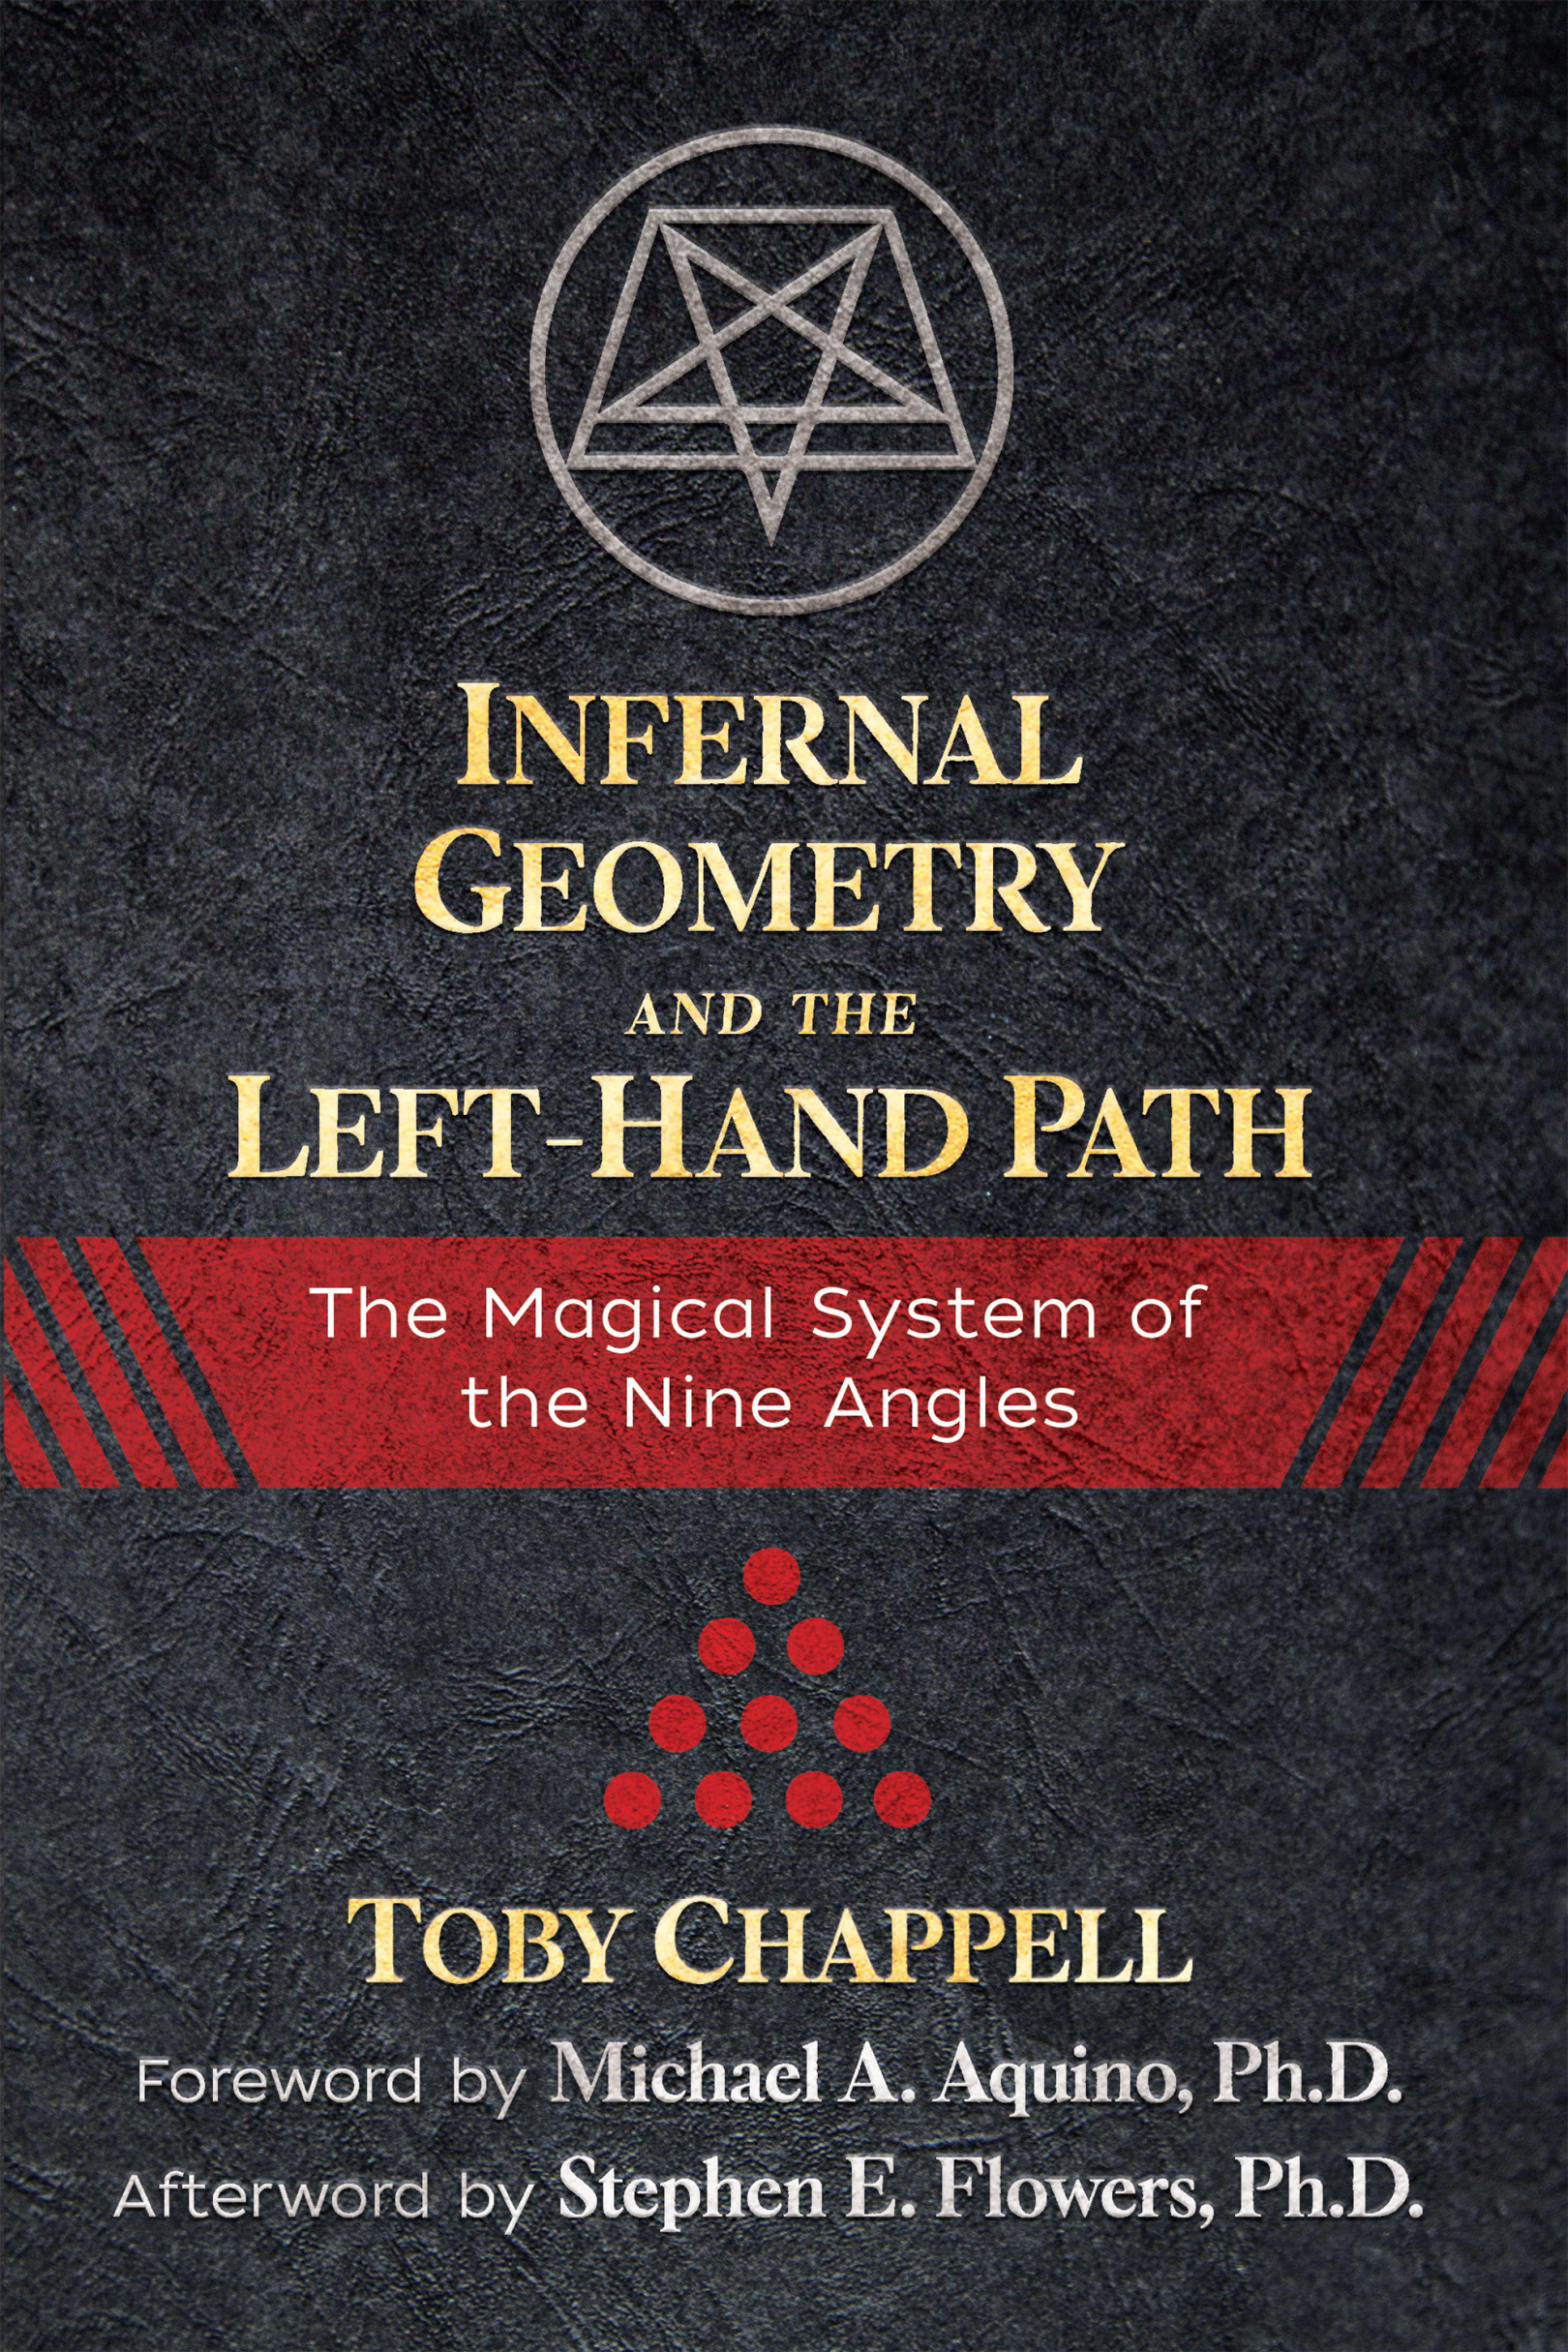 INFERNAL GEOMETRY AND THE LEFT-HAND PATH Toby Chappell has revealed a - photo 1